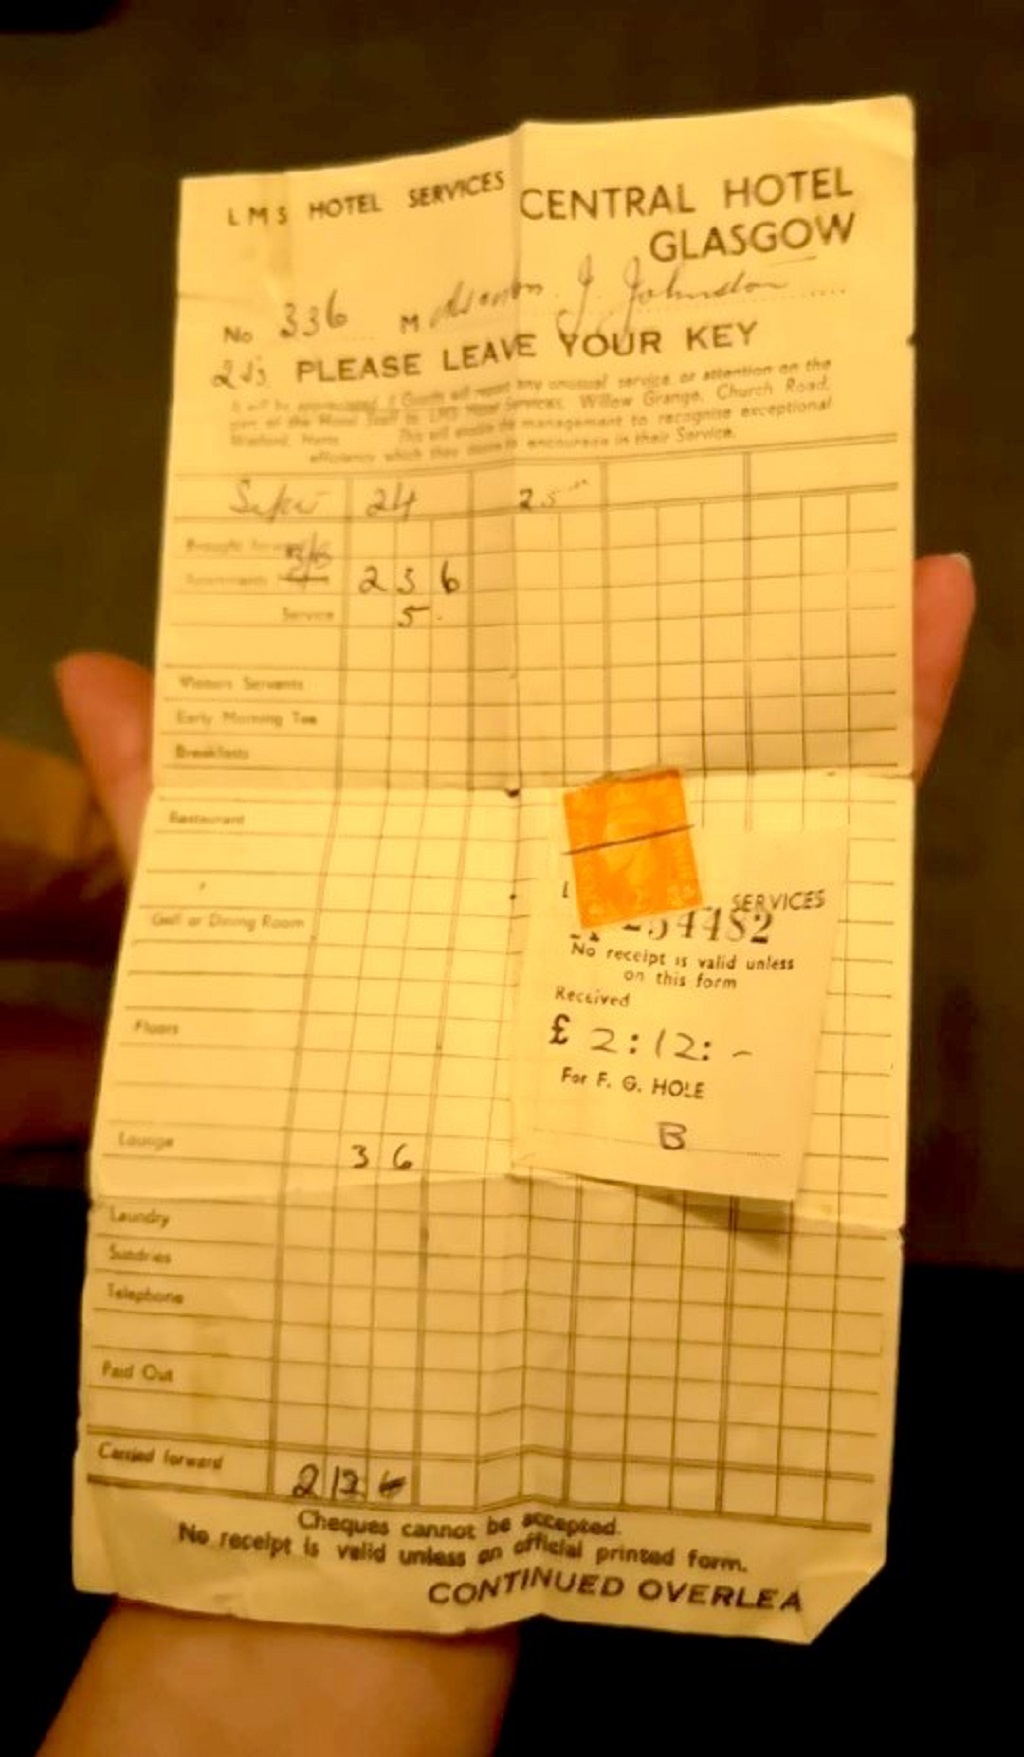 The Grand Central Hotel receipt from 1947